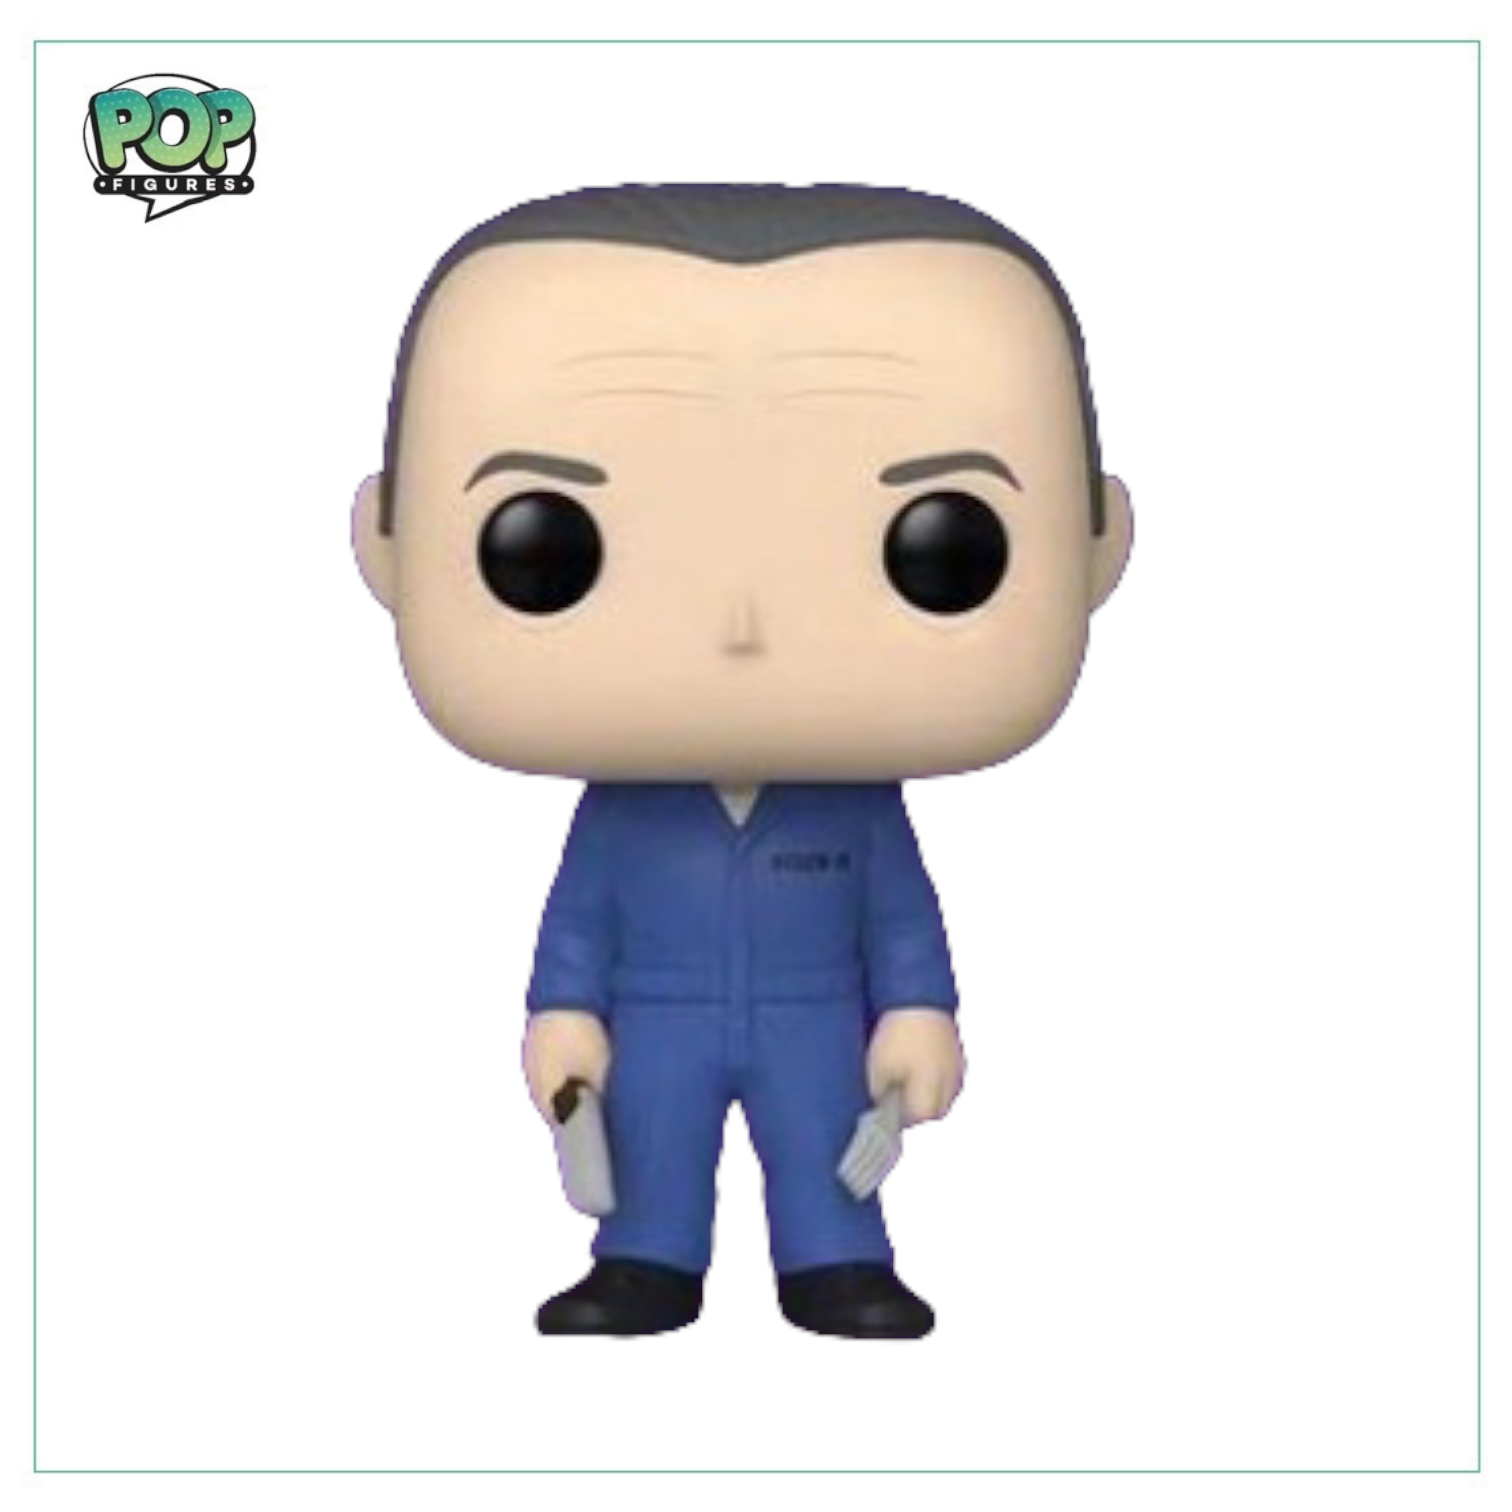 Hannibal Lecter Funko Pop! Silence of the Lambs - PREORDER